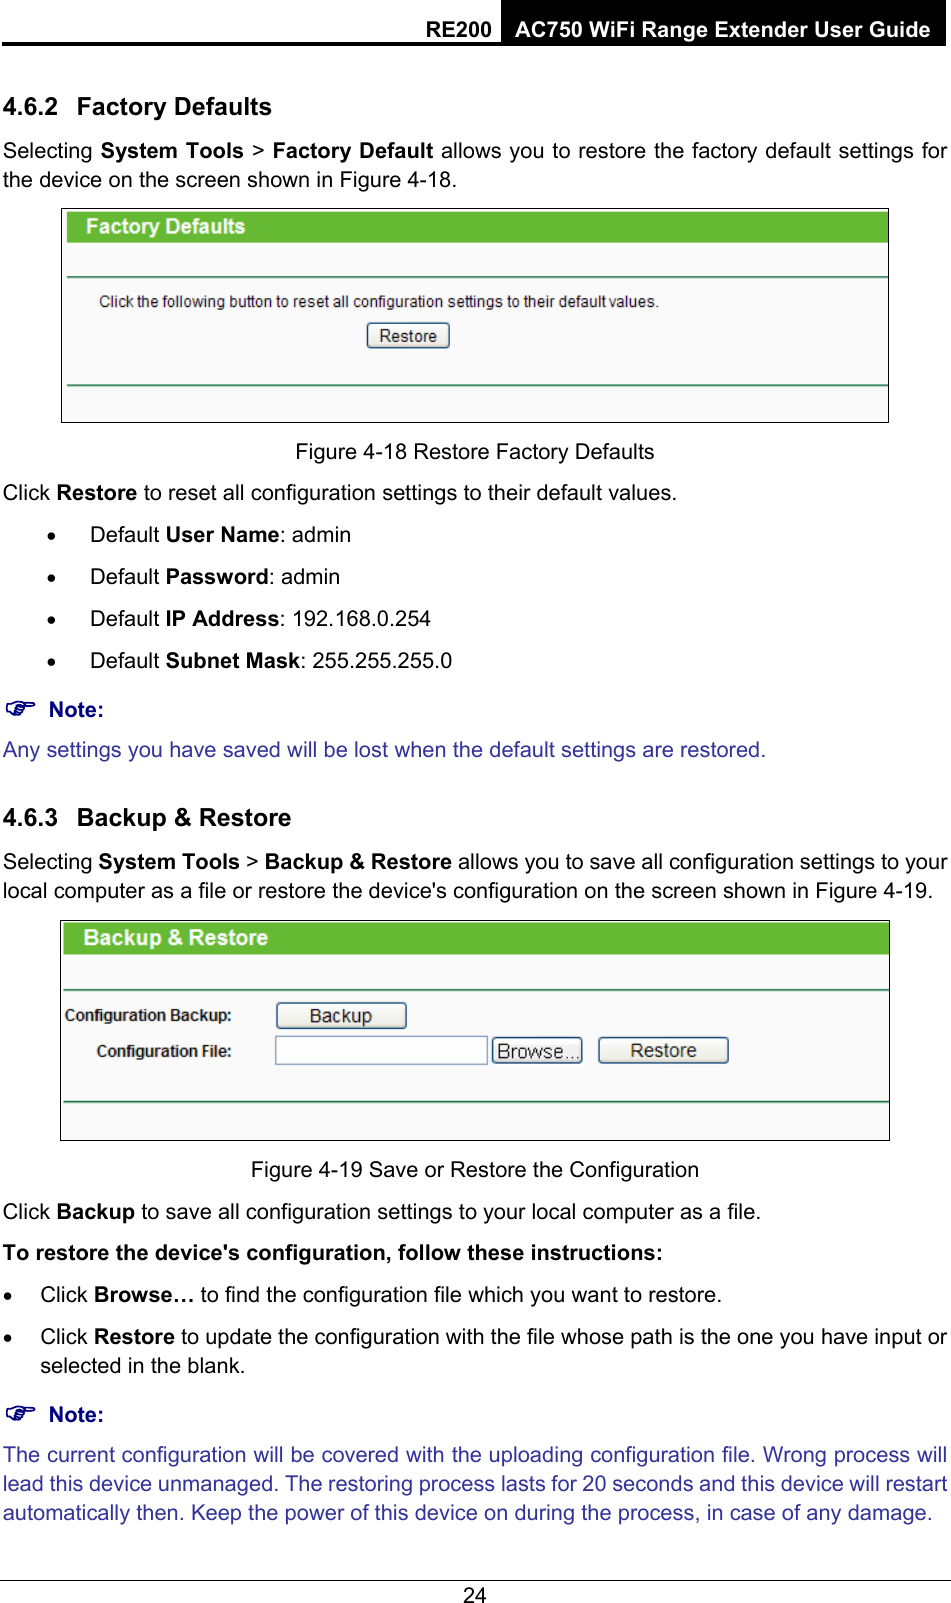 RE200 AC750 WiFi Range Extender User Guide 4.6.2  Factory Defaults Selecting System Tools &gt; Factory Default allows you to restore the factory default settings for the device on the screen shown in Figure 4-18.  Figure 4-18 Restore Factory Defaults Click Restore to reset all configuration settings to their default values.   • Default User Name: admin • Default Password: admin • Default IP Address: 192.168.0.254 • Default Subnet Mask: 255.255.255.0 ) Note: Any settings you have saved will be lost when the default settings are restored. 4.6.3  Backup &amp; Restore Selecting System Tools &gt; Backup &amp; Restore allows you to save all configuration settings to your local computer as a file or restore the device&apos;s configuration on the screen shown in Figure 4-19.  Figure 4-19 Save or Restore the Configuration Click Backup to save all configuration settings to your local computer as a file.   To restore the device&apos;s configuration, follow these instructions: • Click Browse… to find the configuration file which you want to restore.   • Click Restore to update the configuration with the file whose path is the one you have input or selected in the blank. ) Note: The current configuration will be covered with the uploading configuration file. Wrong process will lead this device unmanaged. The restoring process lasts for 20 seconds and this device will restart automatically then. Keep the power of this device on during the process, in case of any damage.   24 